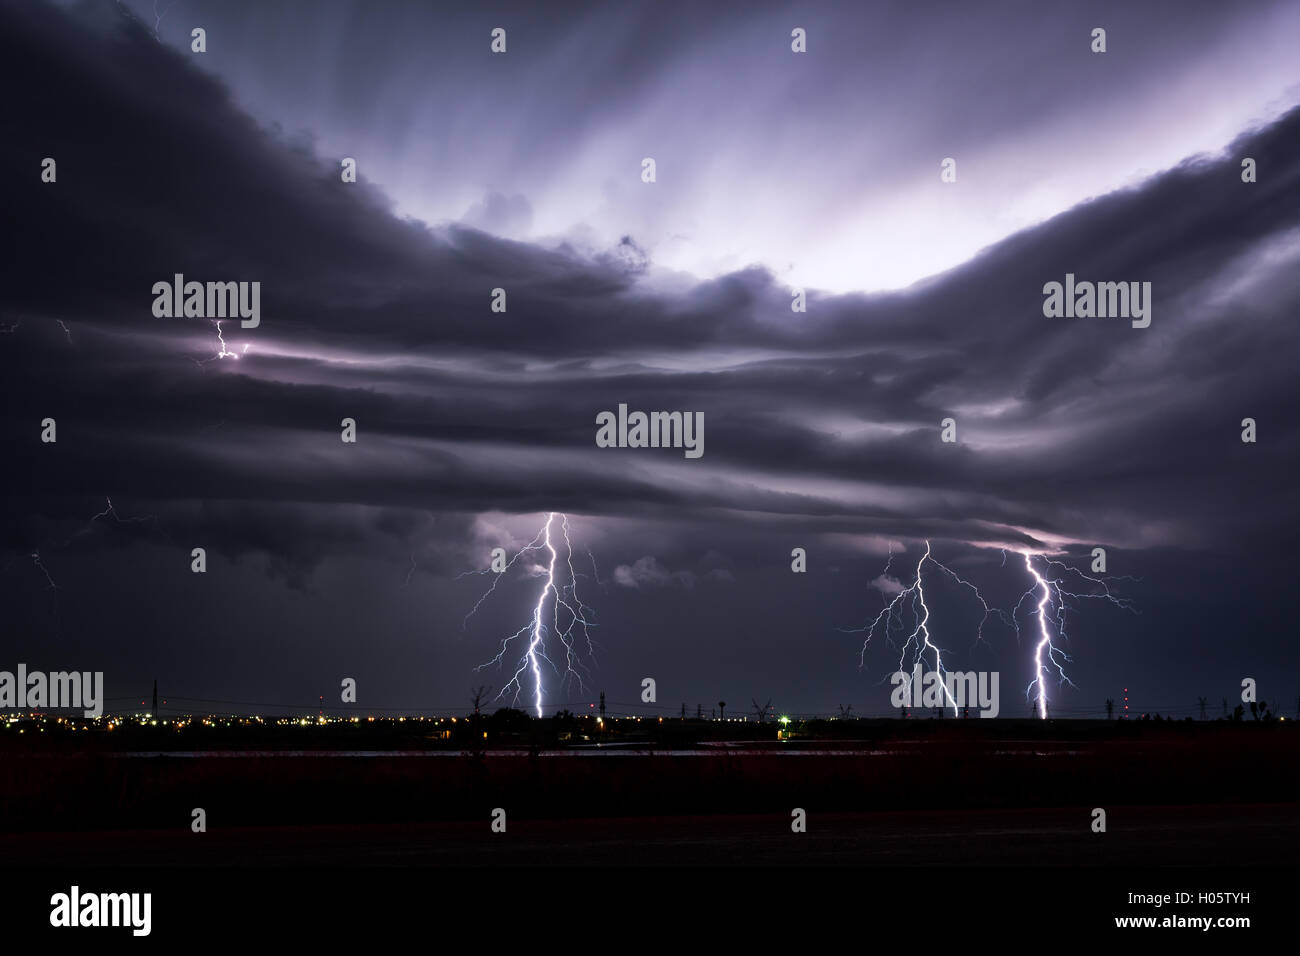 Lightning strikes during a thunderstorm near Snyder, Texas Stock Photo